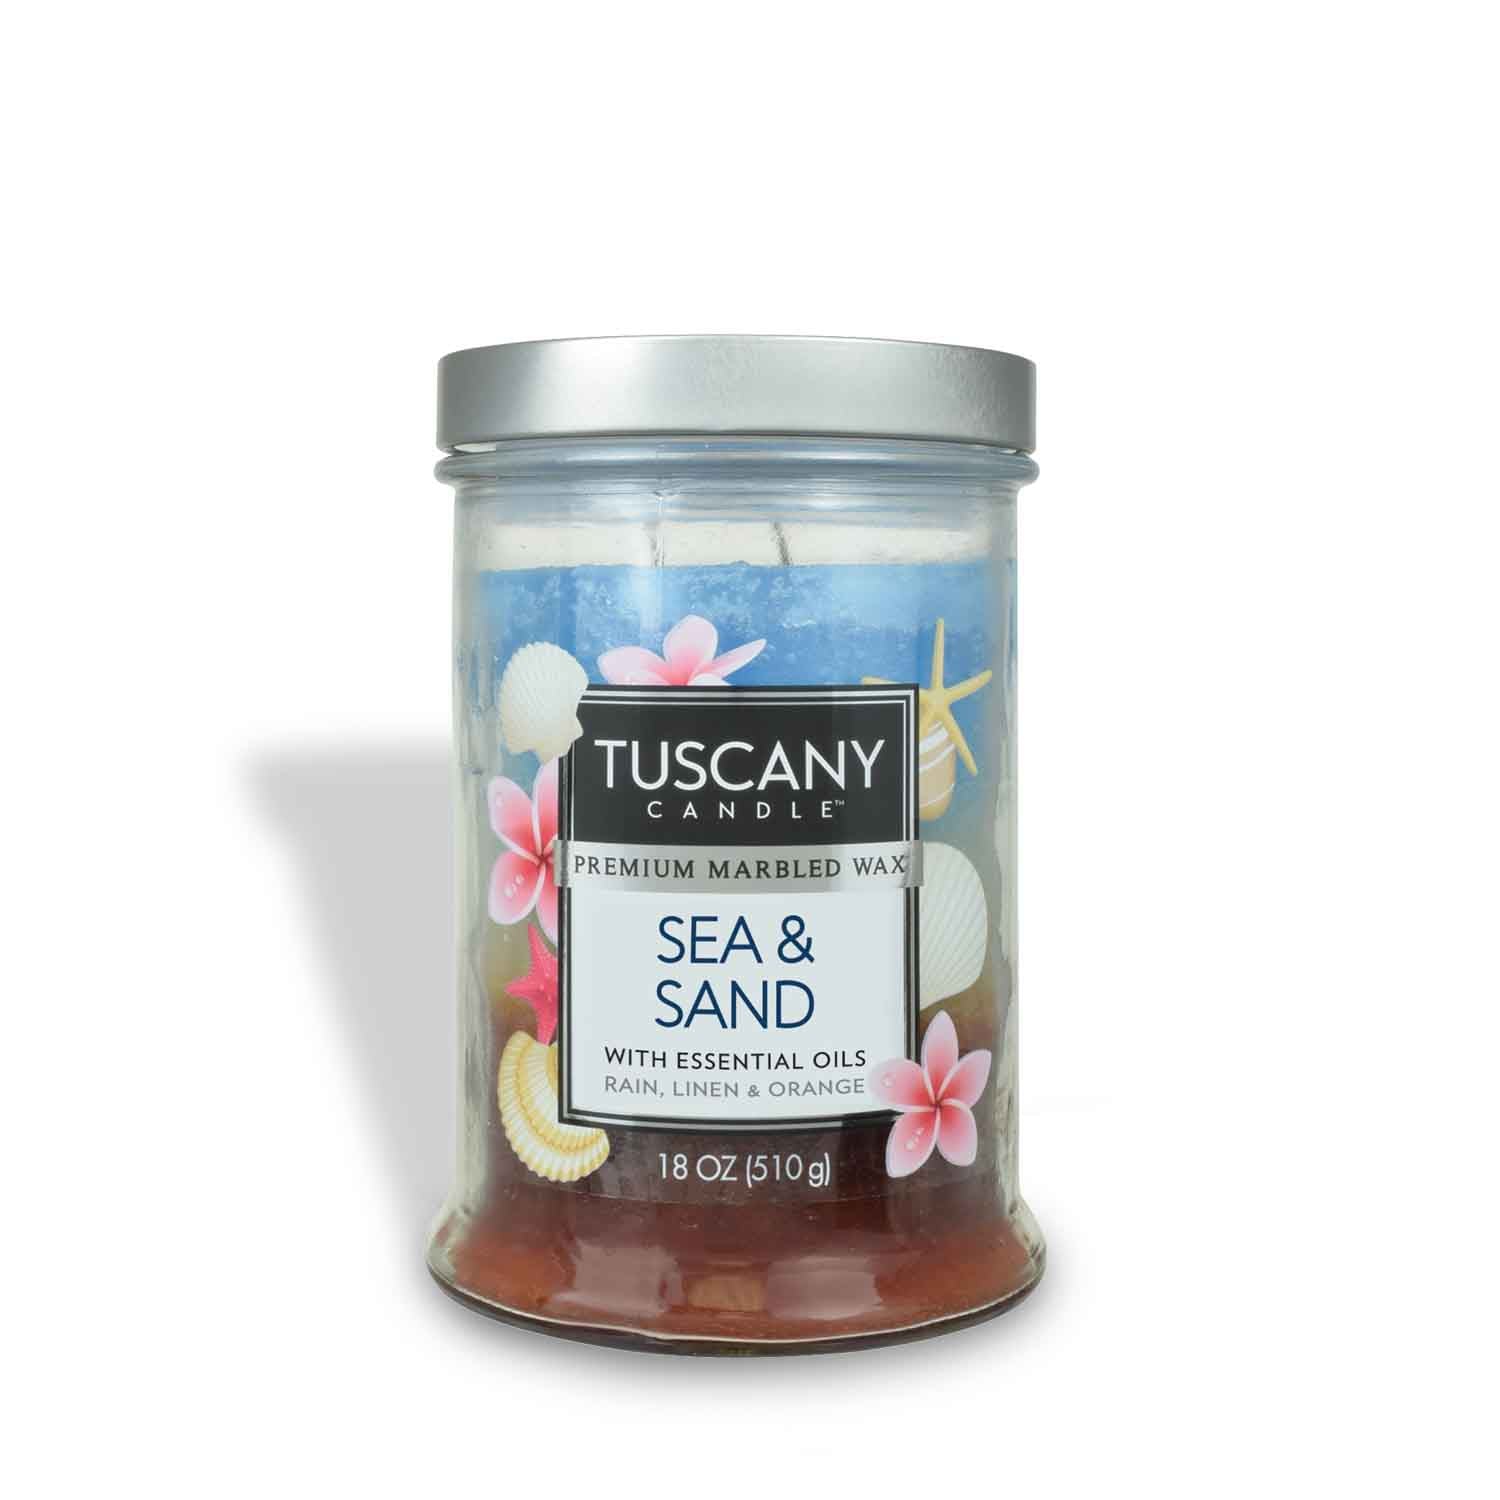 Tuscany Candle® EVD Sea & Sand Long-Lasting Scented Jar Candle (18 oz), infused with essential oils.